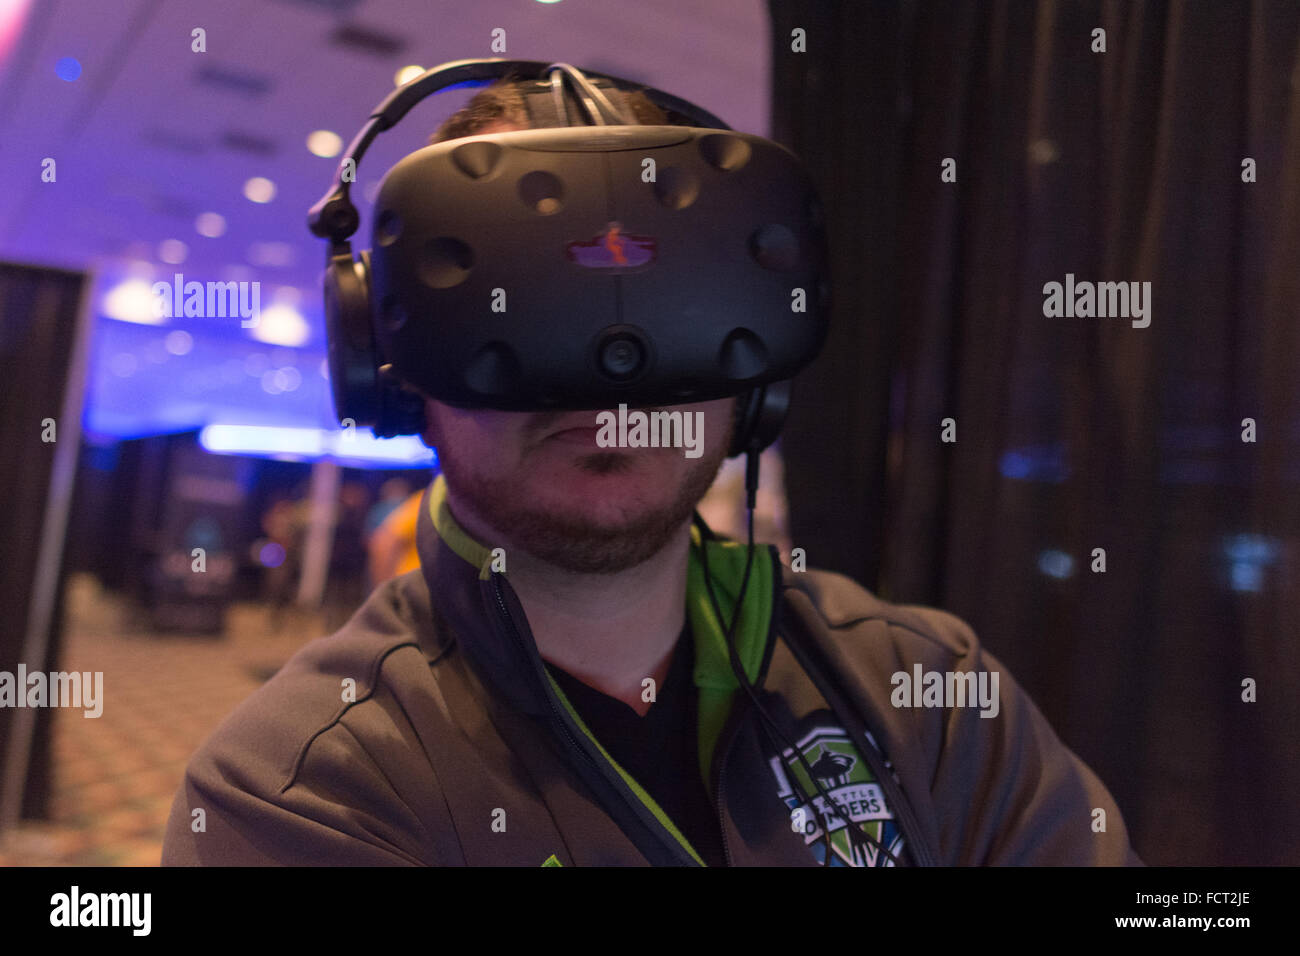 Los Angeles, USA - January 23, 2016: Man tries virtual reality headset during VRLA Expo Winter, virtual reality exposition, at t Stock Photo